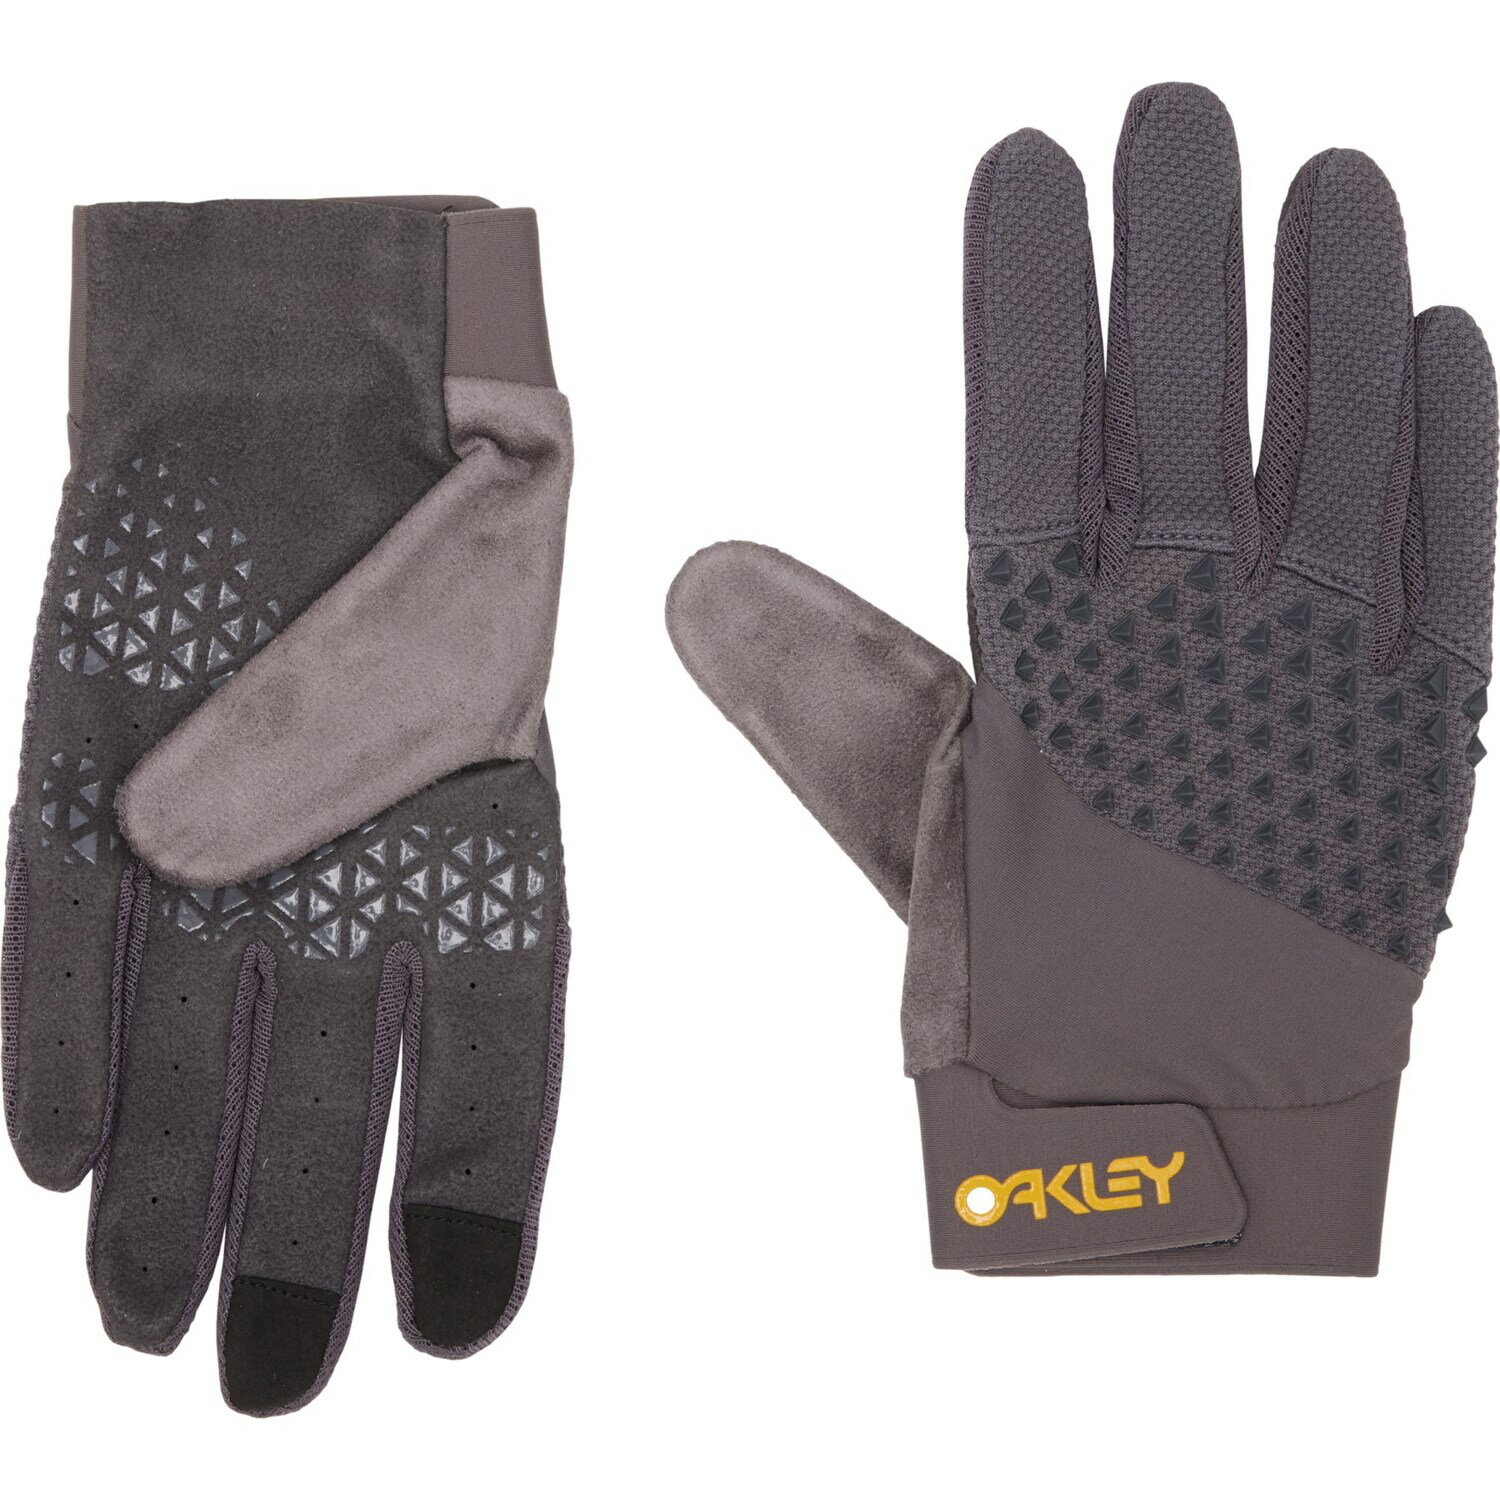 () I[N[ hbv C }Ee oCN O[u - ^b`XN[ Rp`u Oakley Drop In Mountain Bike Gloves - Touchscreen Compatible Forged Iron